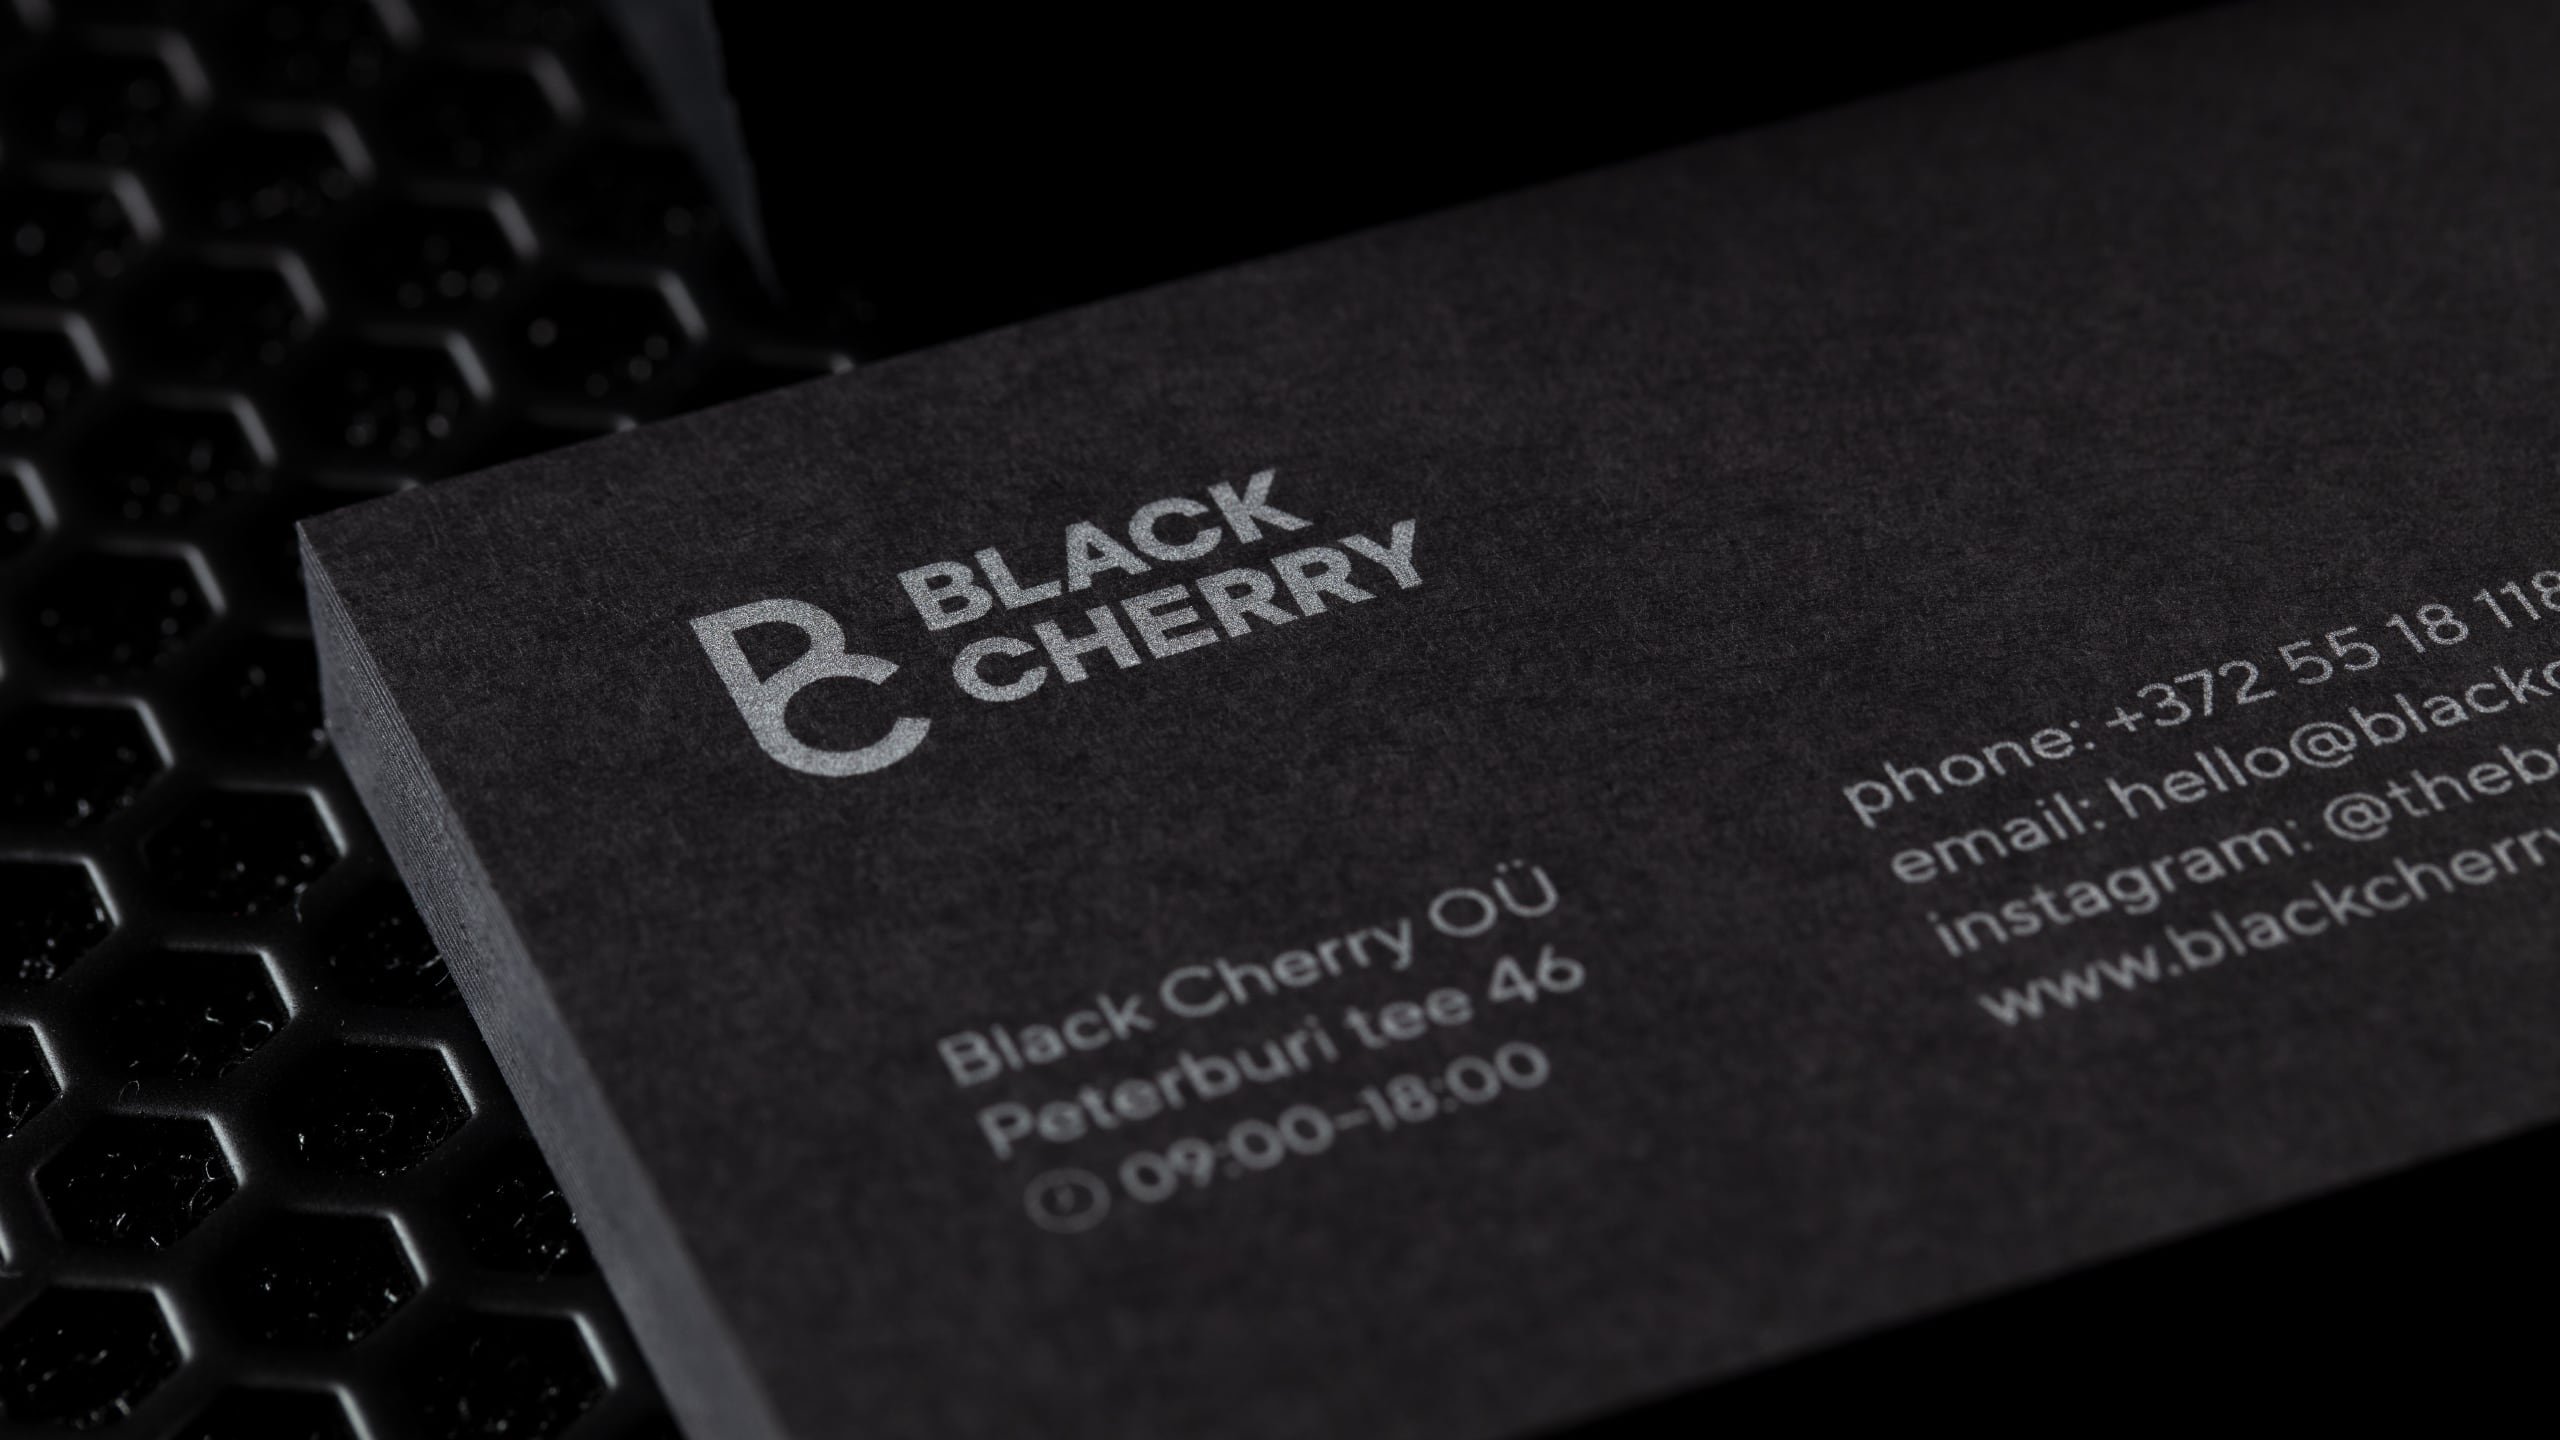 Black Cherry business cards